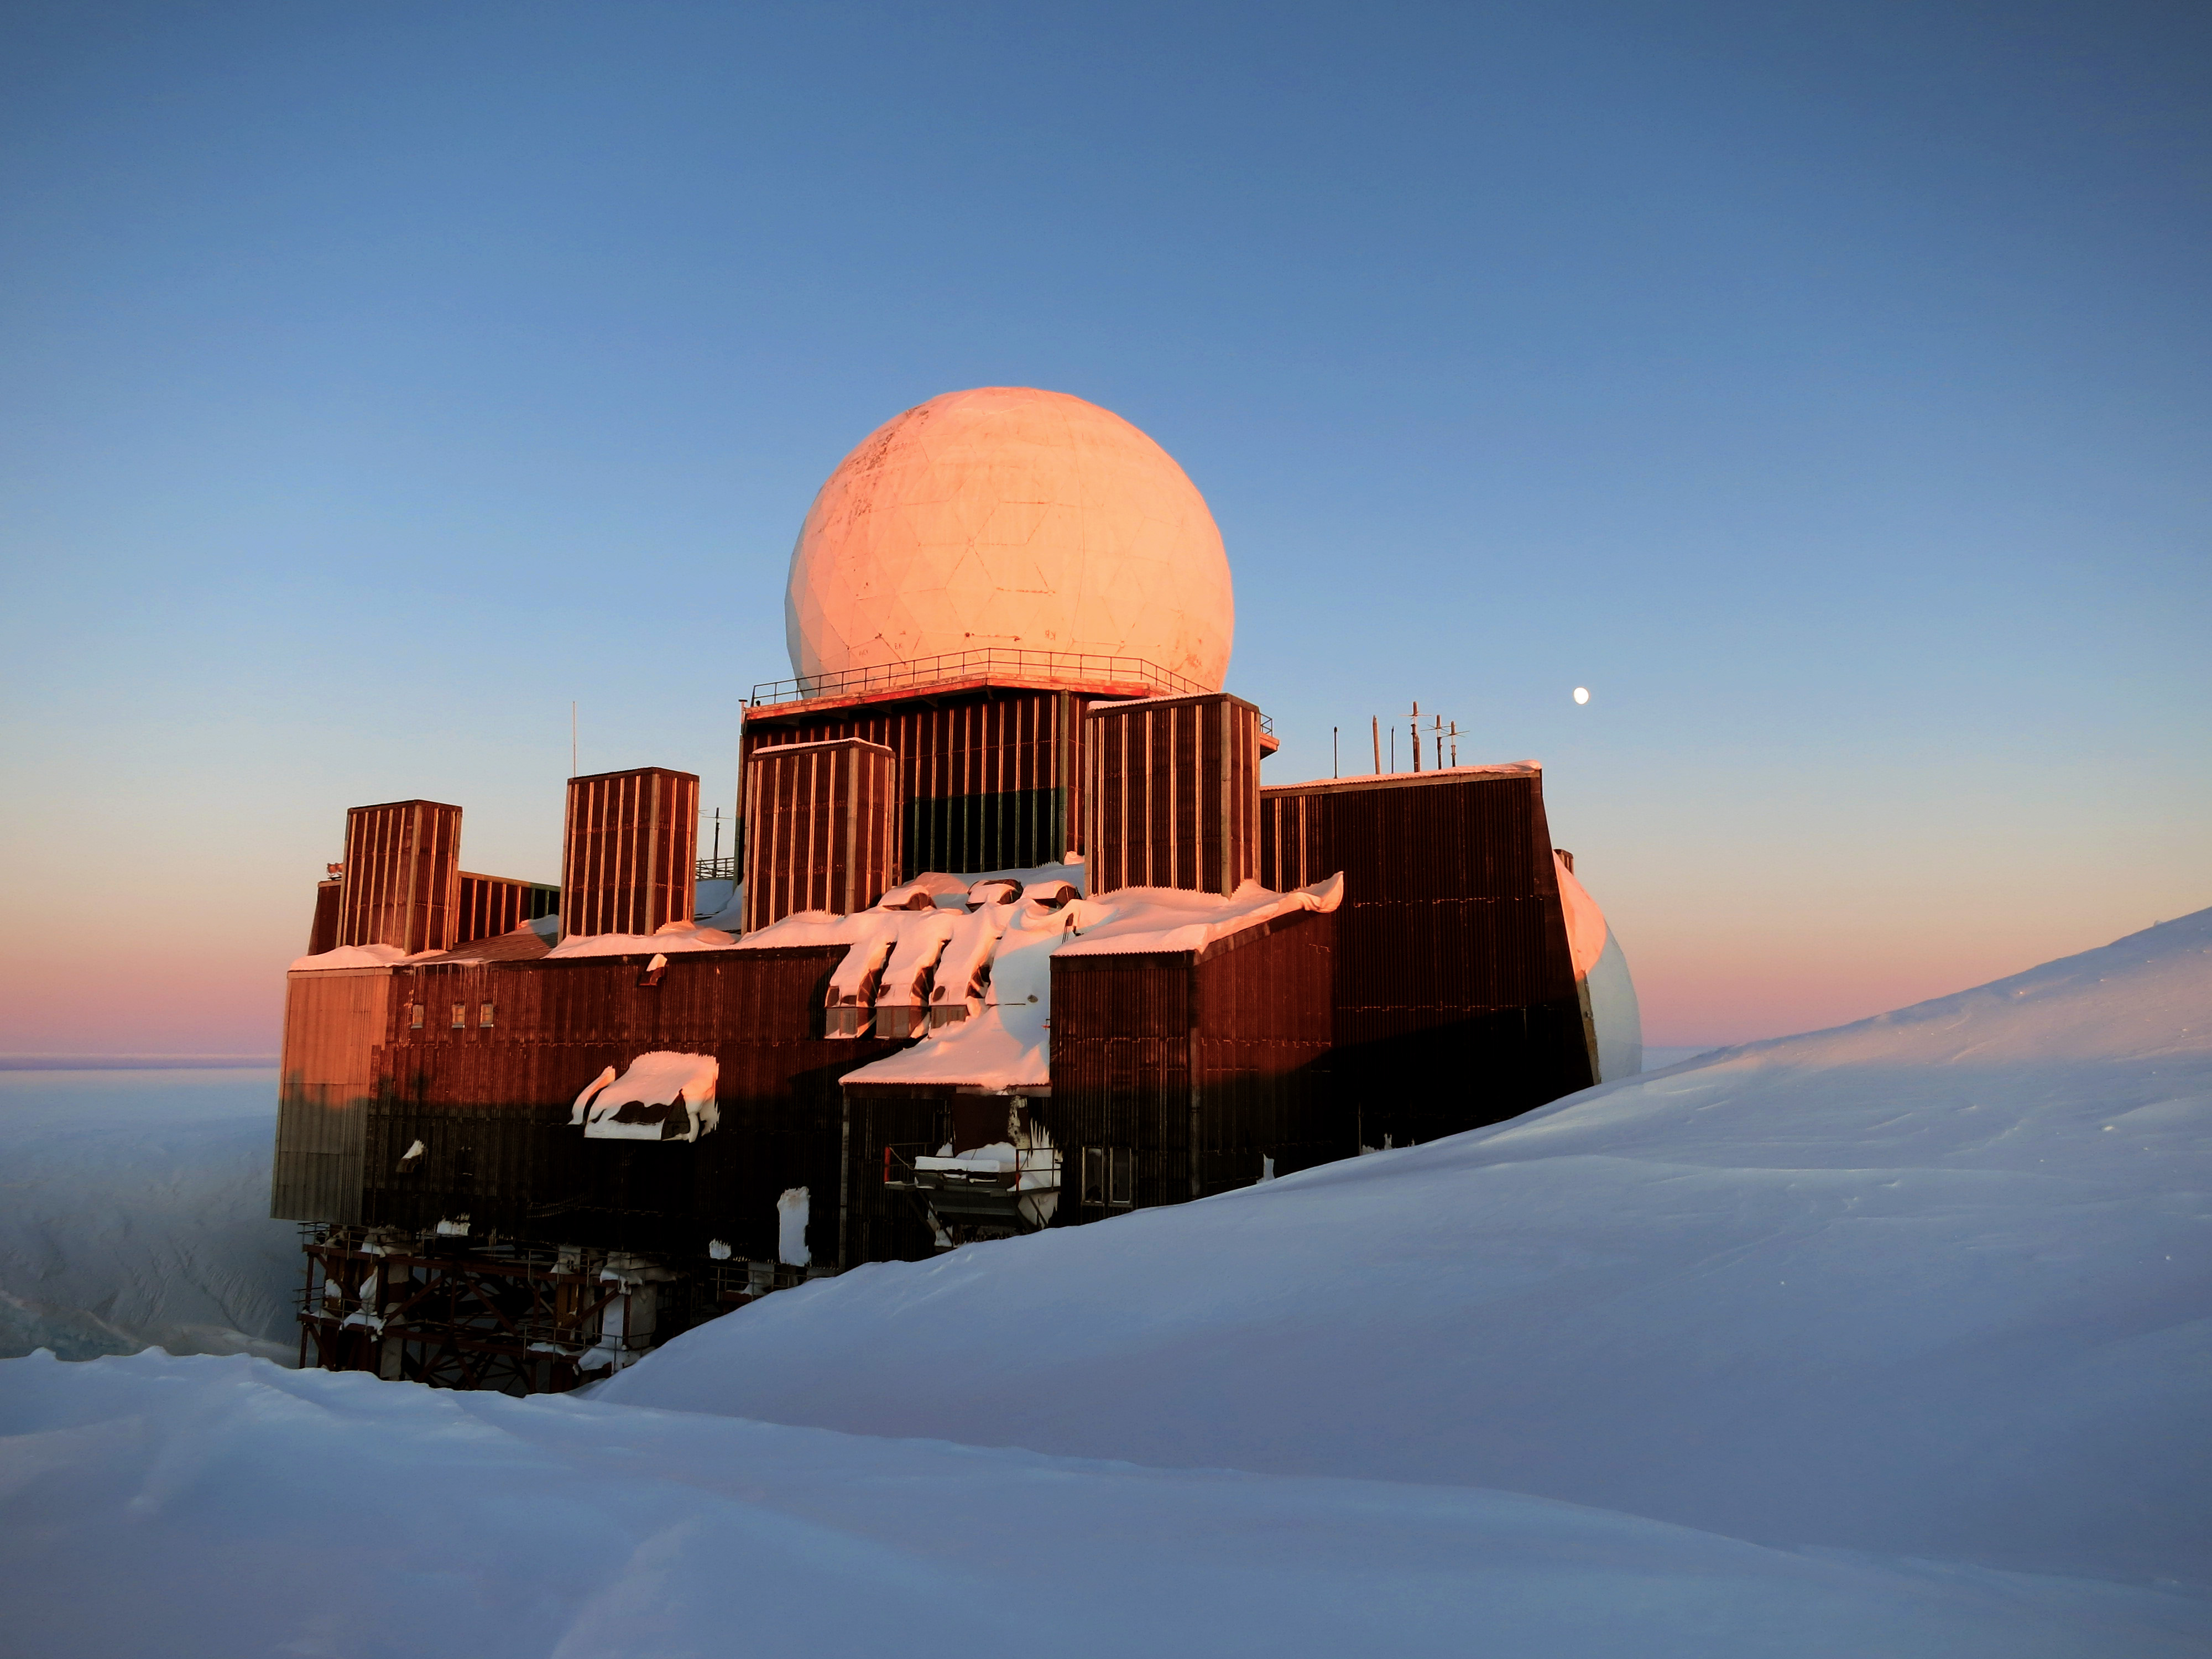 The DYE-2 Station in south Greenland, which was abandoned one day in 1988.